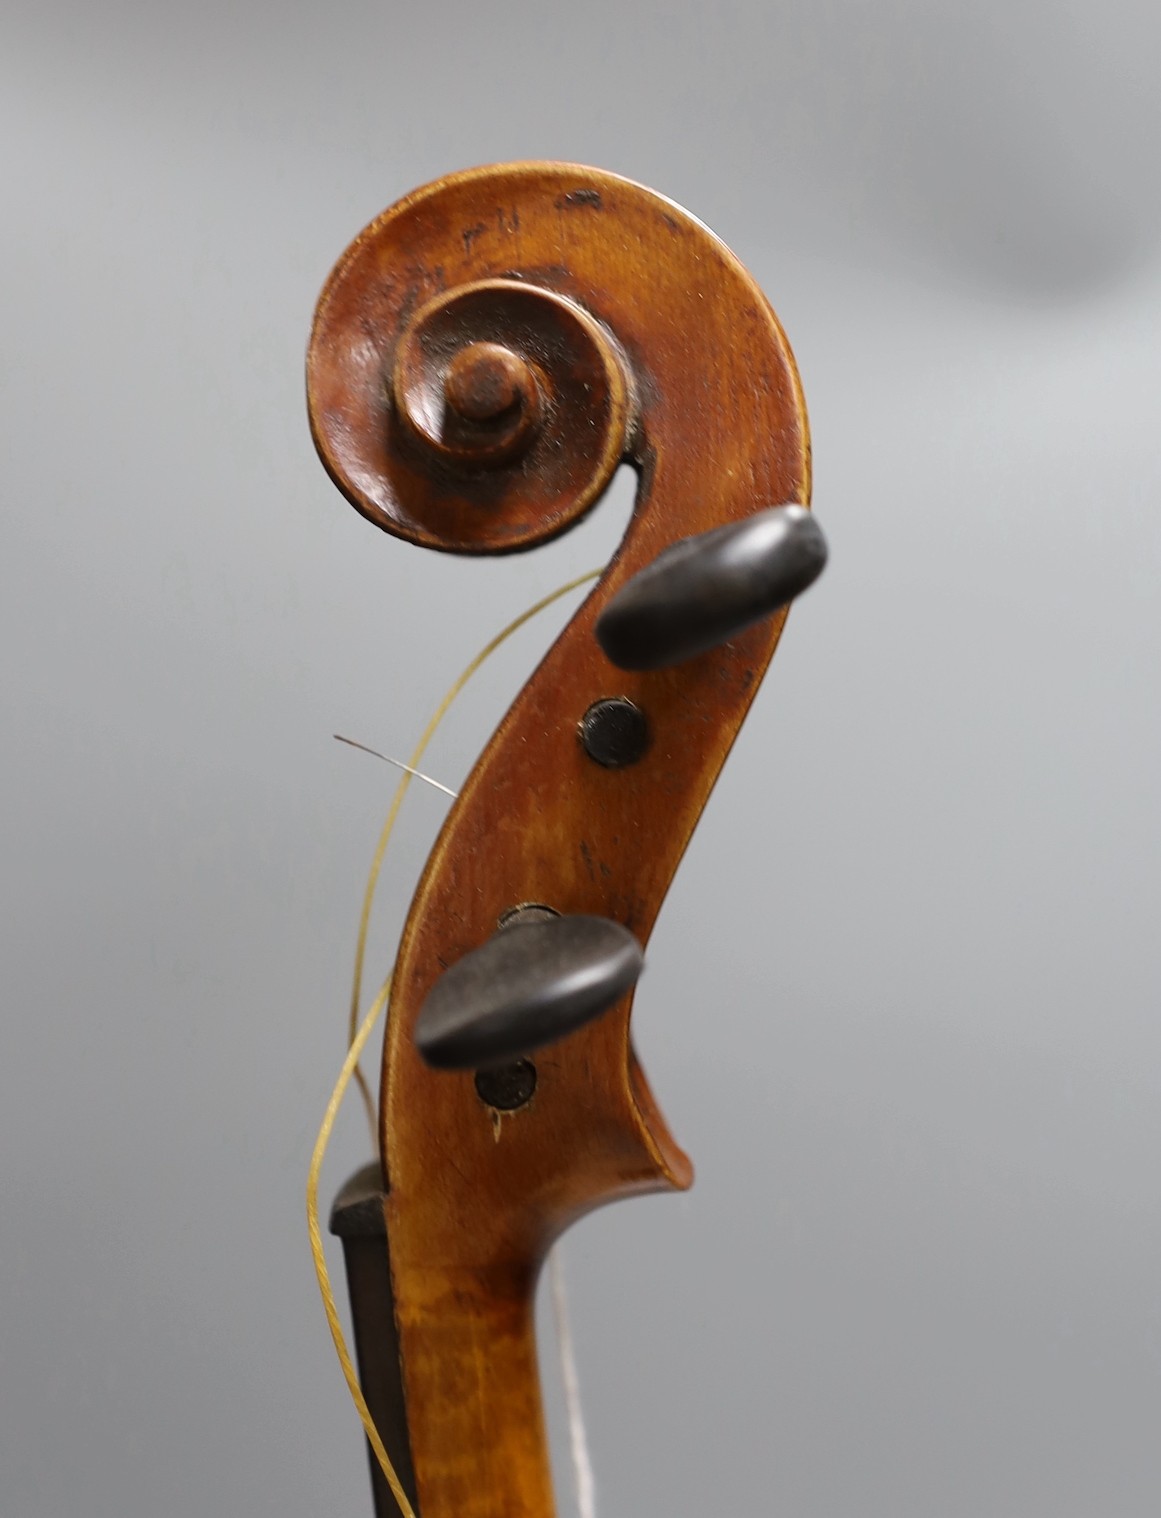 A cased 19th century violin, labelled Stradivarius 1690, with a Dodd bow